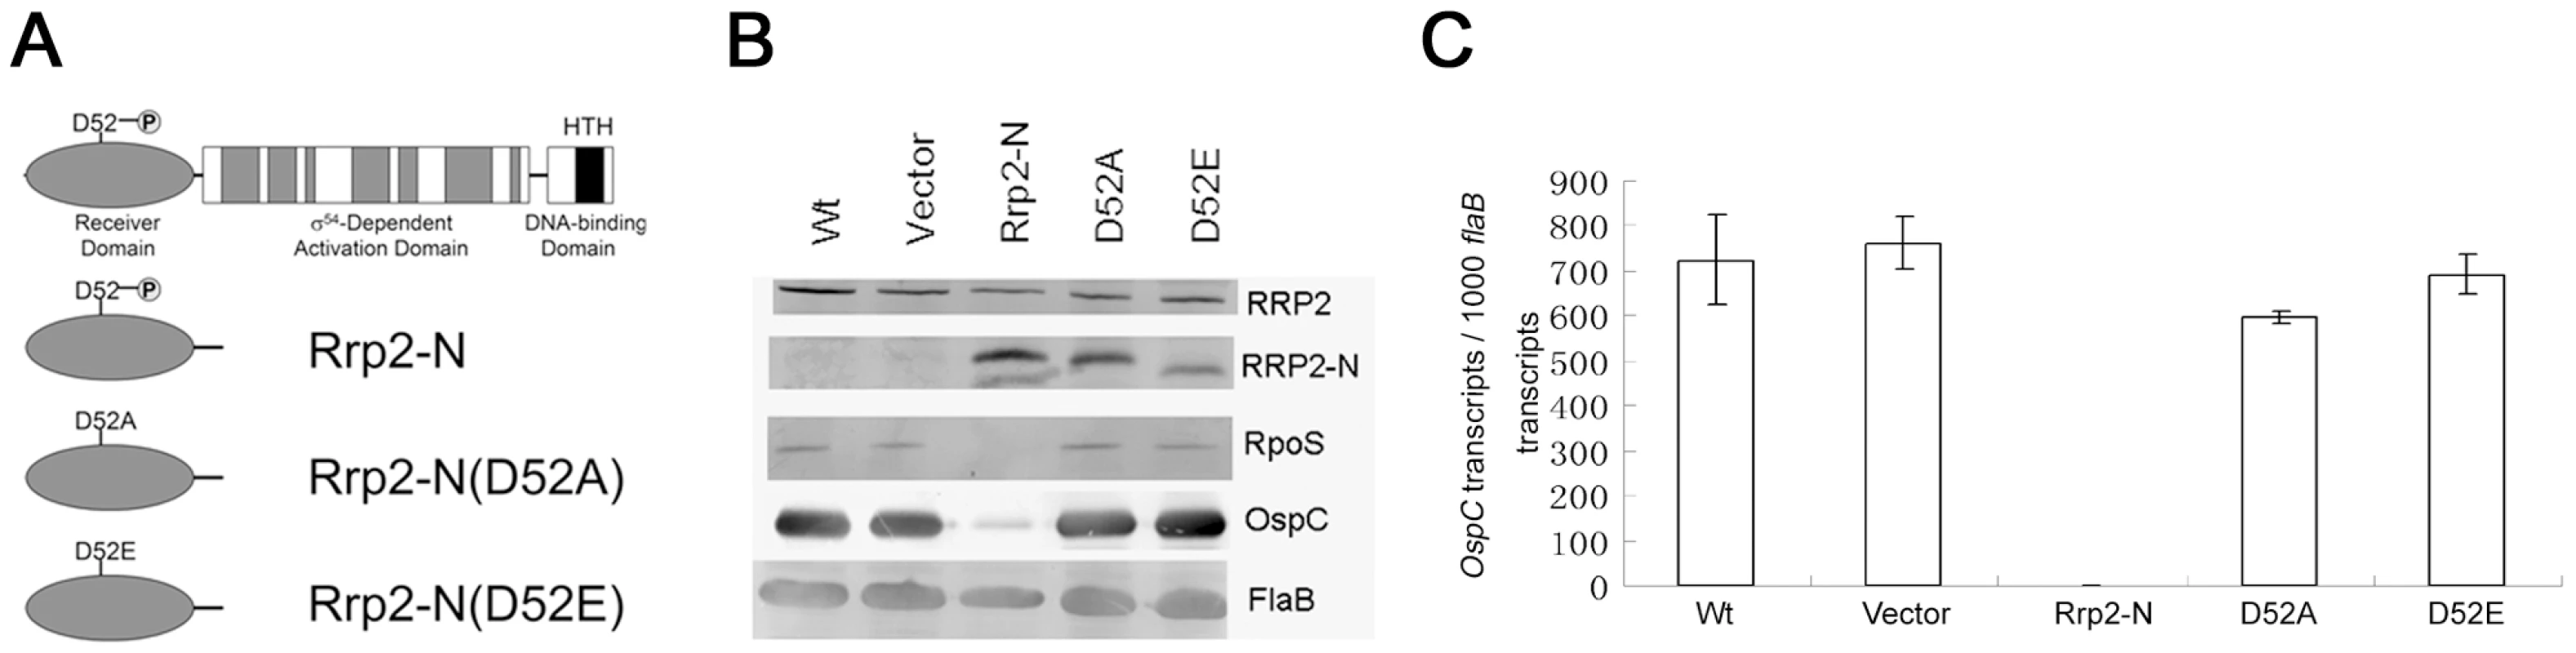 Influence of overexpression of wild-type or mutated version of the Rrp2 N-terminal receiver domain on Rrp2 activation.